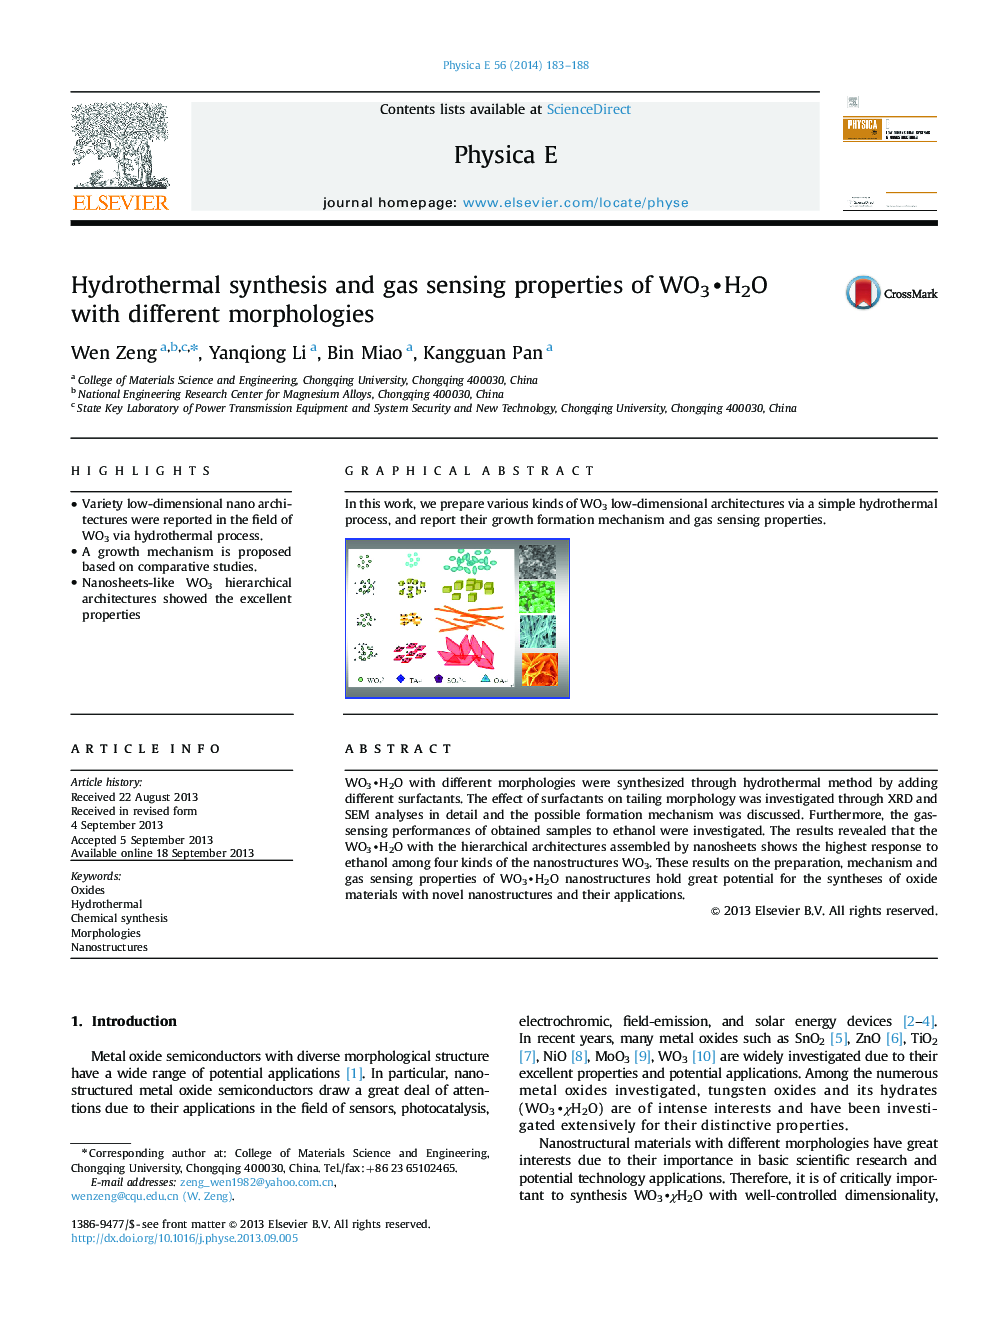 Hydrothermal synthesis and gas sensing properties of WO3H2O with different morphologies